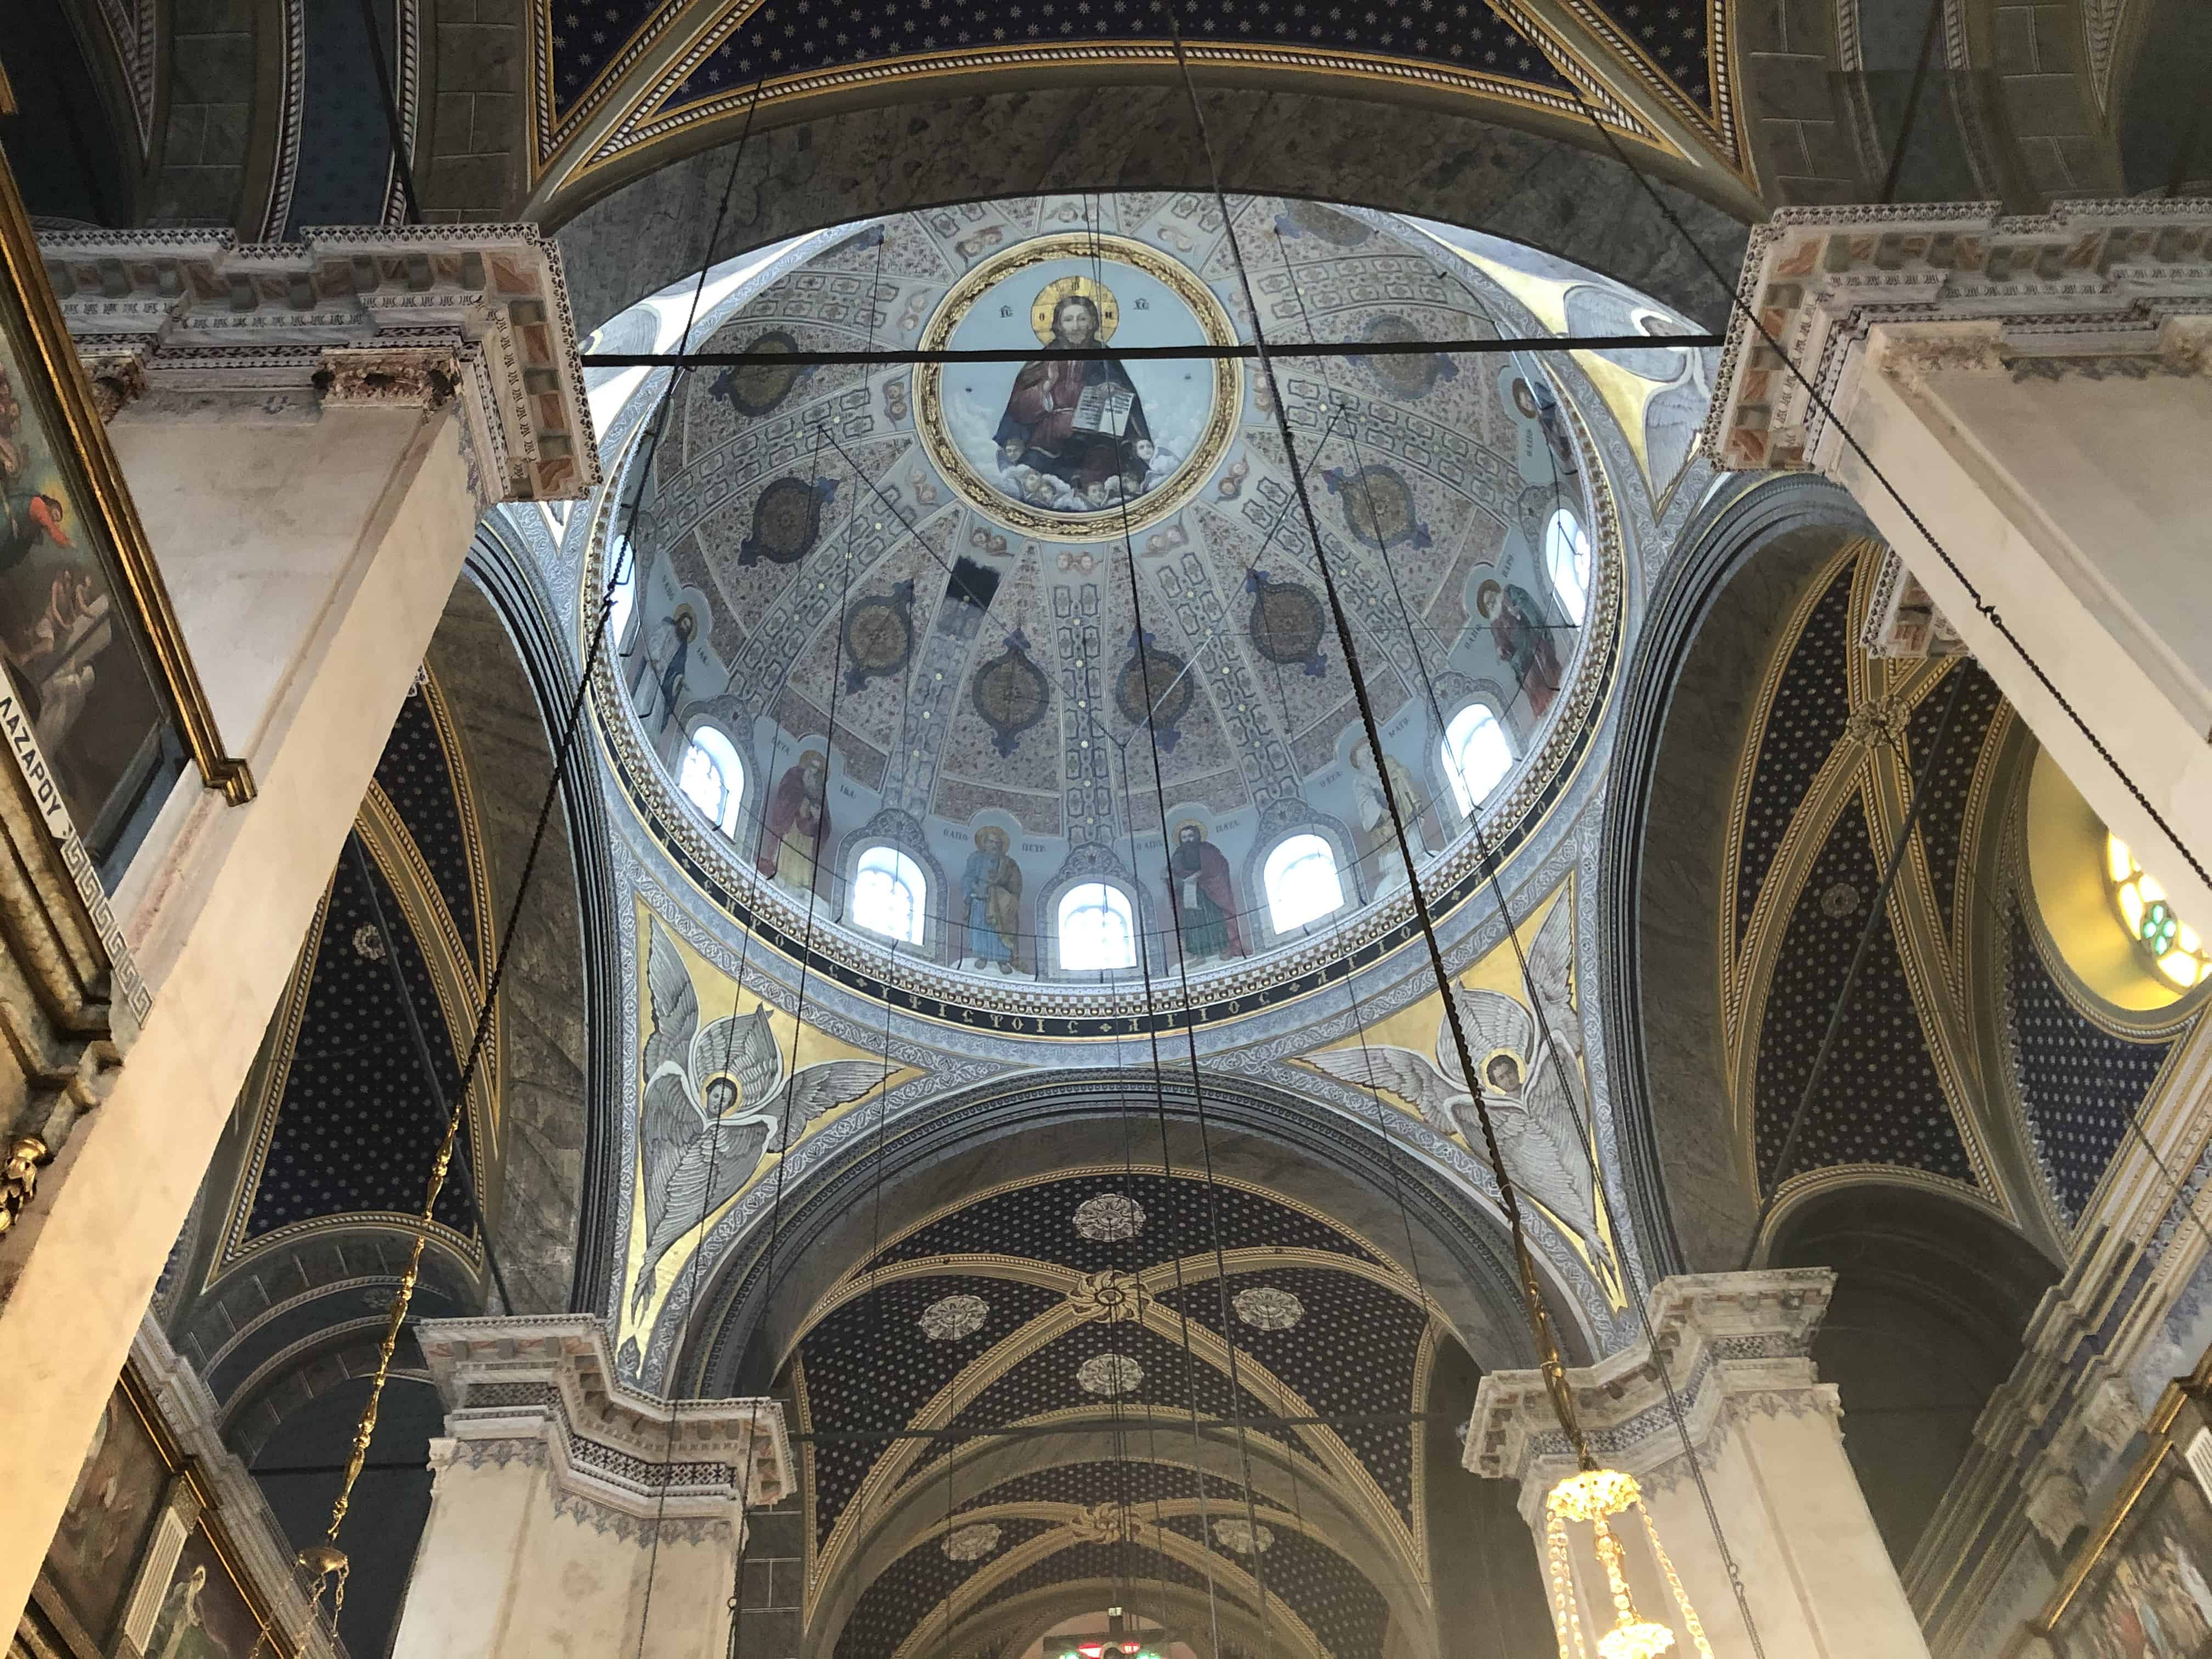 Looking up at the dome of Agia Triada Greek Orthodox Church in Istanbul, Turkey